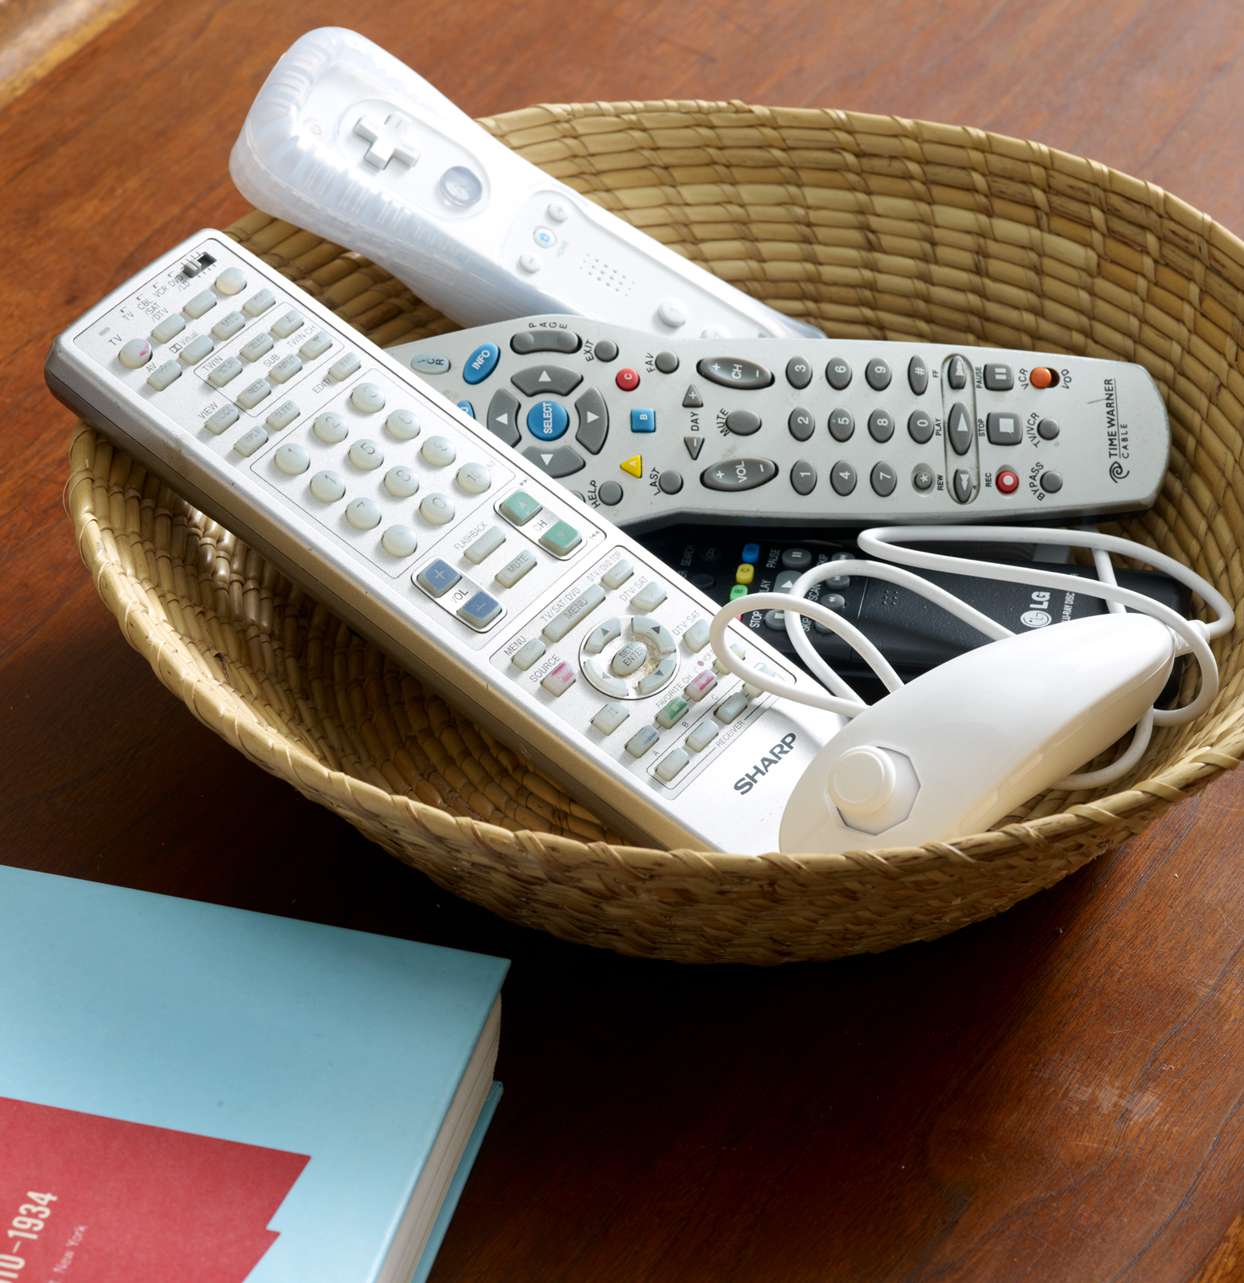 wicker basket containing remotes